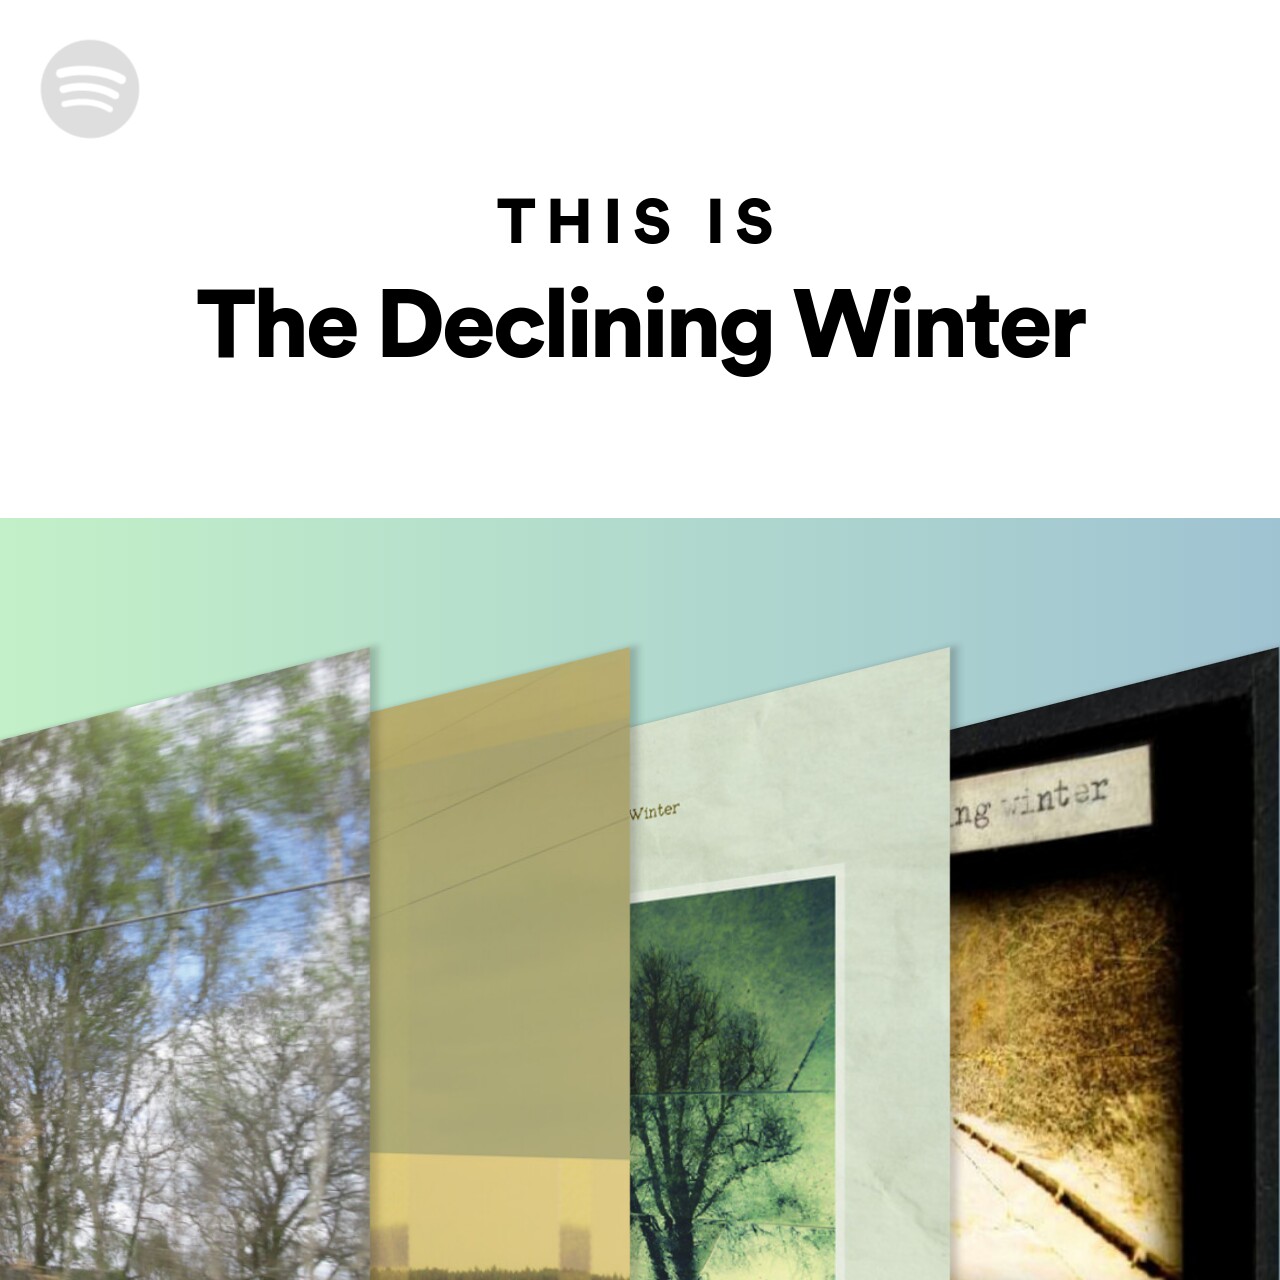 This Is The Declining Winter